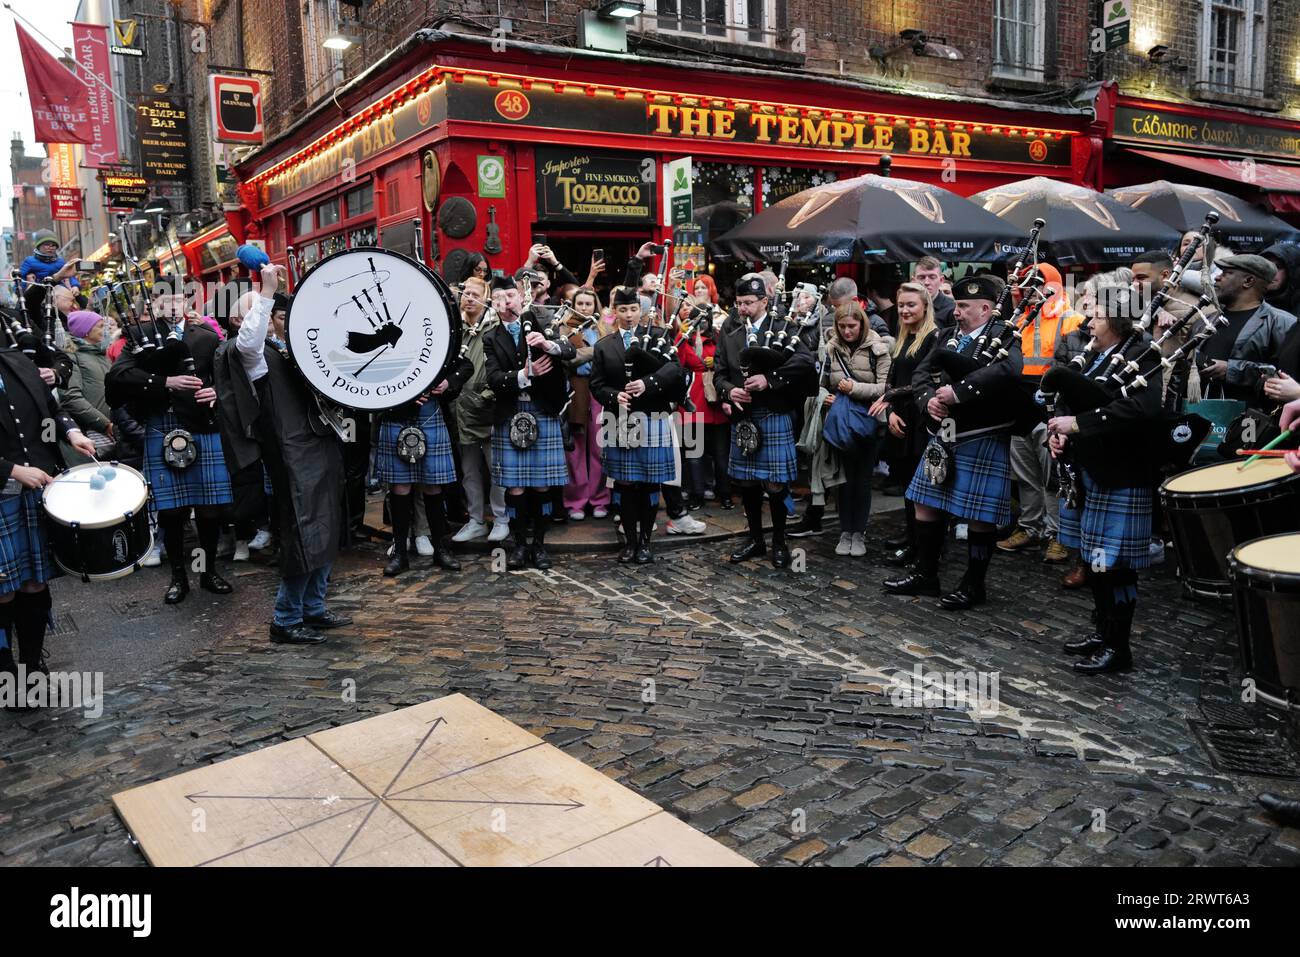 Members of the Clew Bay pipe band perform in Temple Bar during Tradfest, an Irish traditional music festival. Dublin, Ireland, Europe Stock Photo